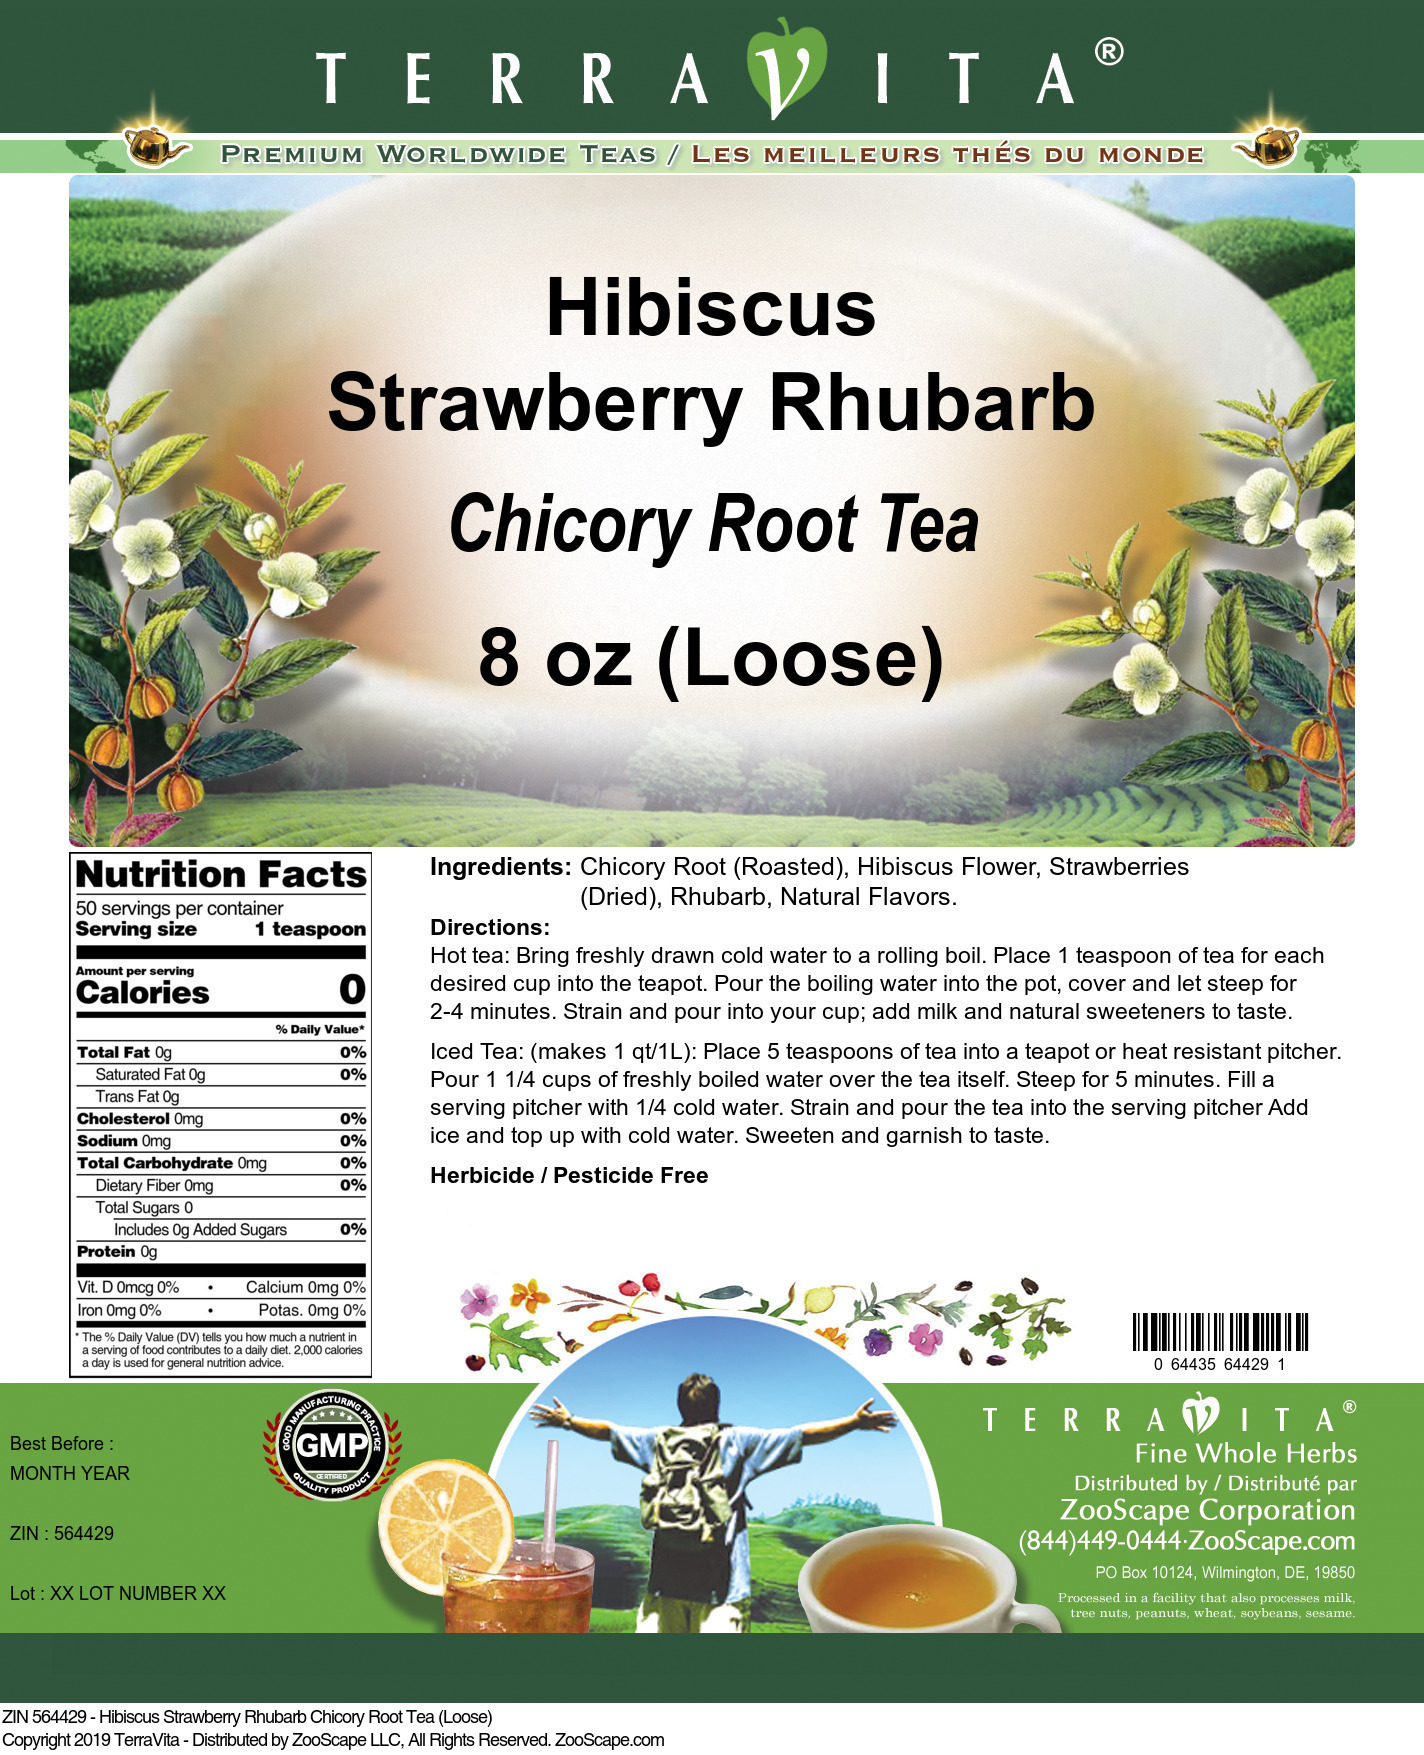 Hibiscus Strawberry Rhubarb Chicory Root Tea (Loose) - Label